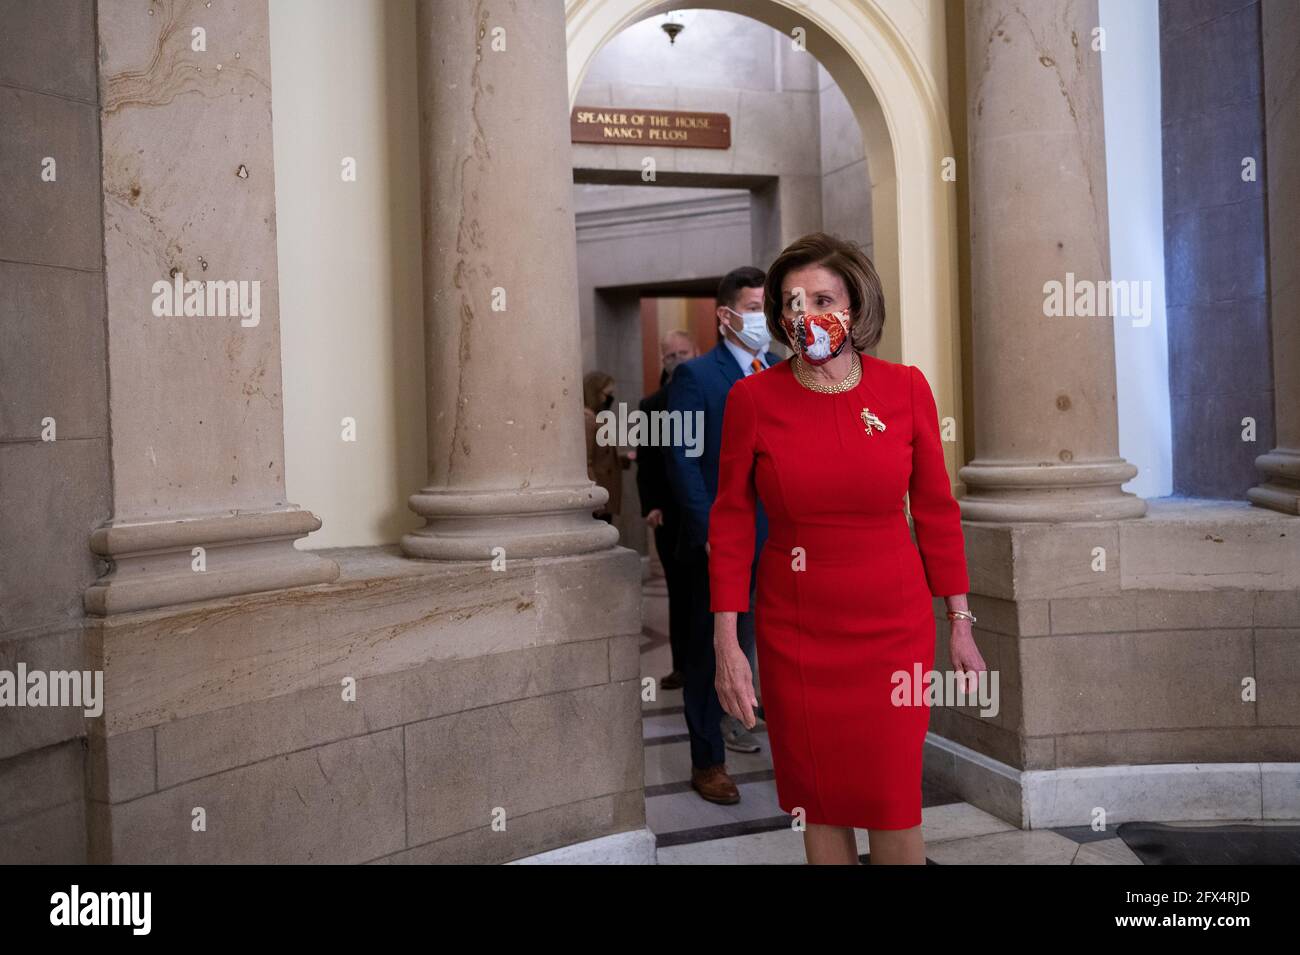 Speaker of the House Nancy Pelosi (D-CA) leaves her office at the U.S. Capitol, in Washington, D.C., on Tuesday, May 25, 2021. Today the Senate will vote on Kristen Clarke, President Biden's nominee to lead the Civil Rights Division at the Justice Department, as bipartisan talks on police reform legislation continue. (Graeme Sloan/Sipa USA) Stock Photo